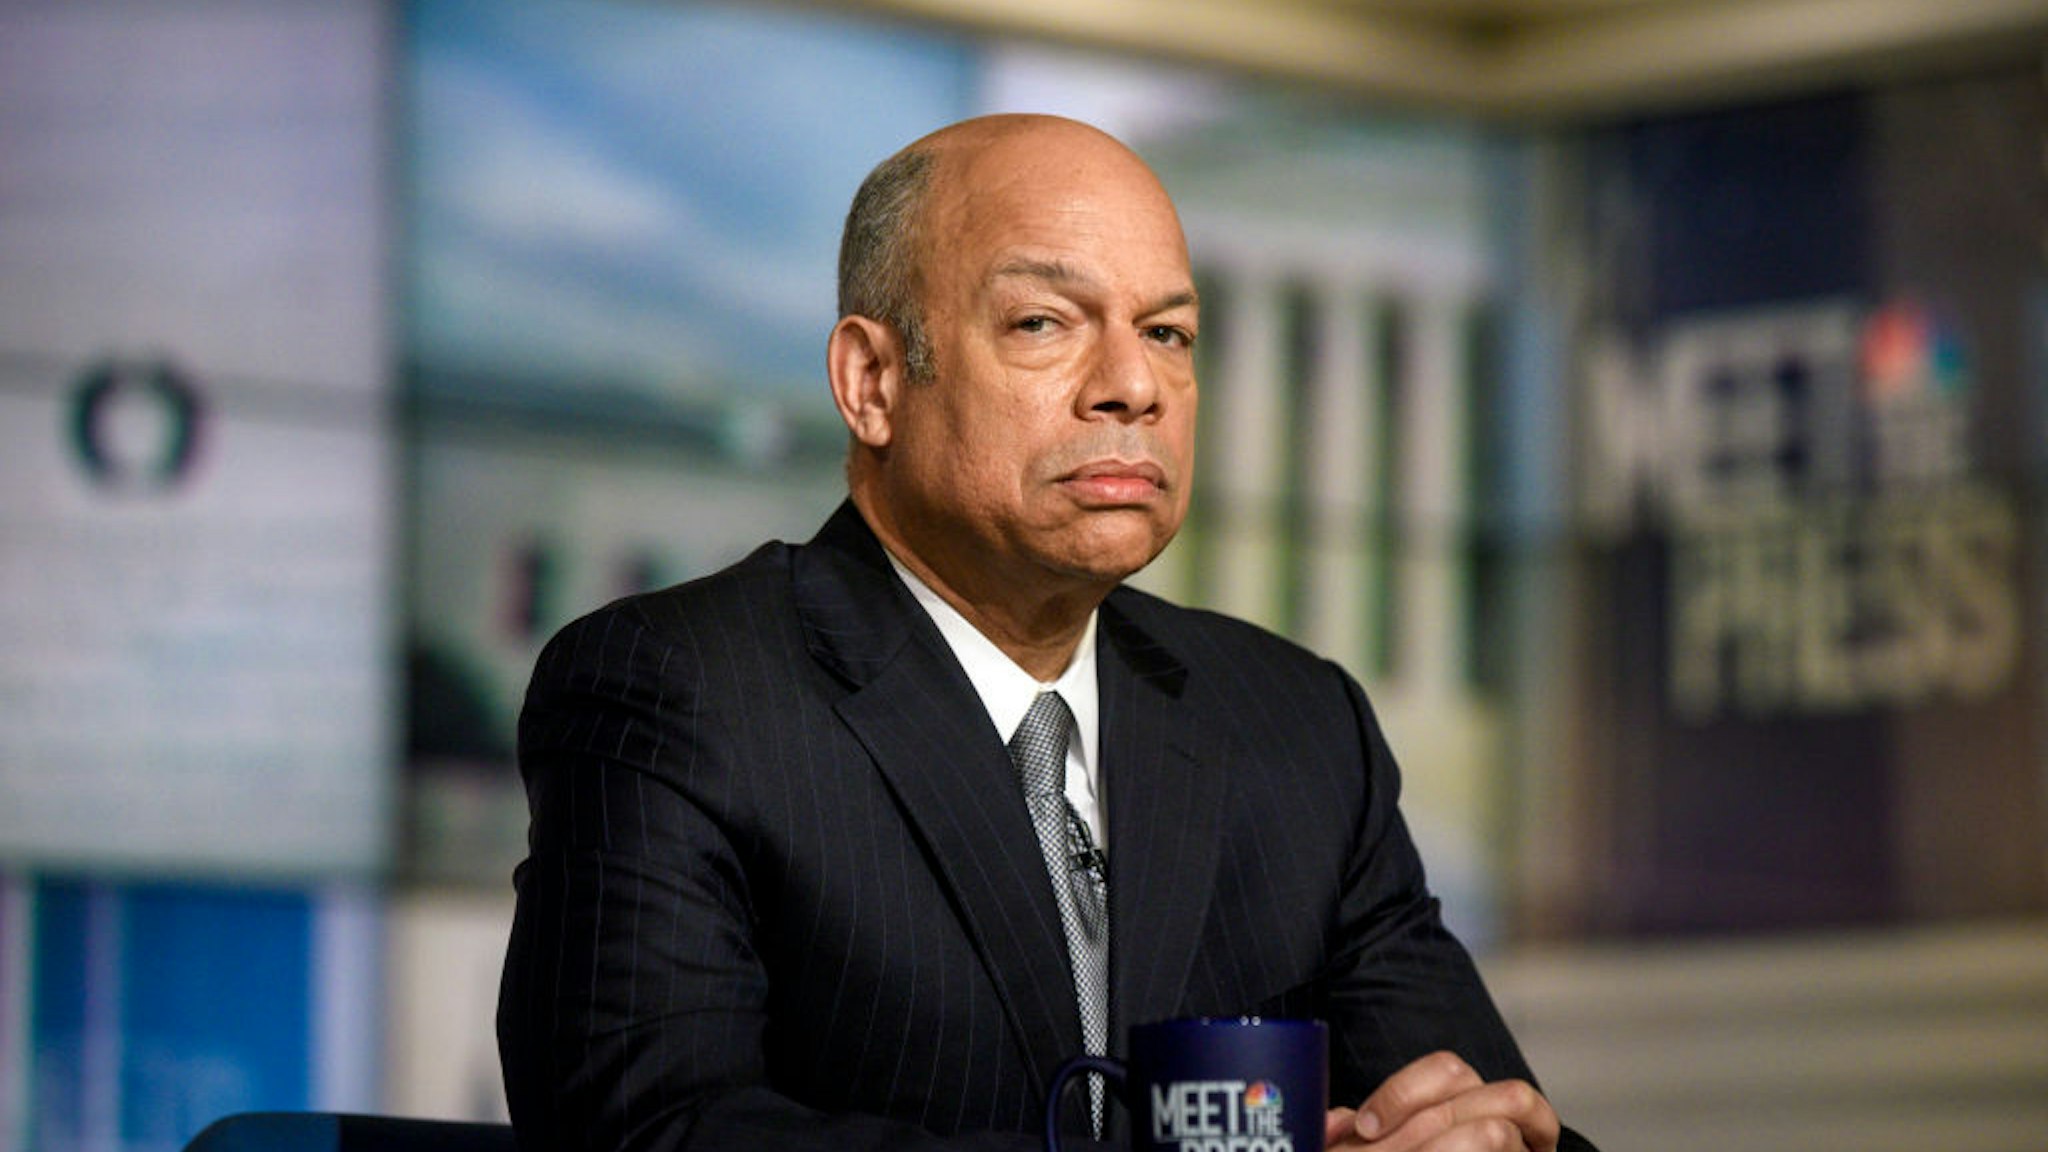 MEET THE PRESS -- Pictured: (l-r) ? Jeh Johnson, Former Secretary of Homeland Security, appears on "Meet the Press" in Washington, D.C., Sunday, Feb. 24, 2019.